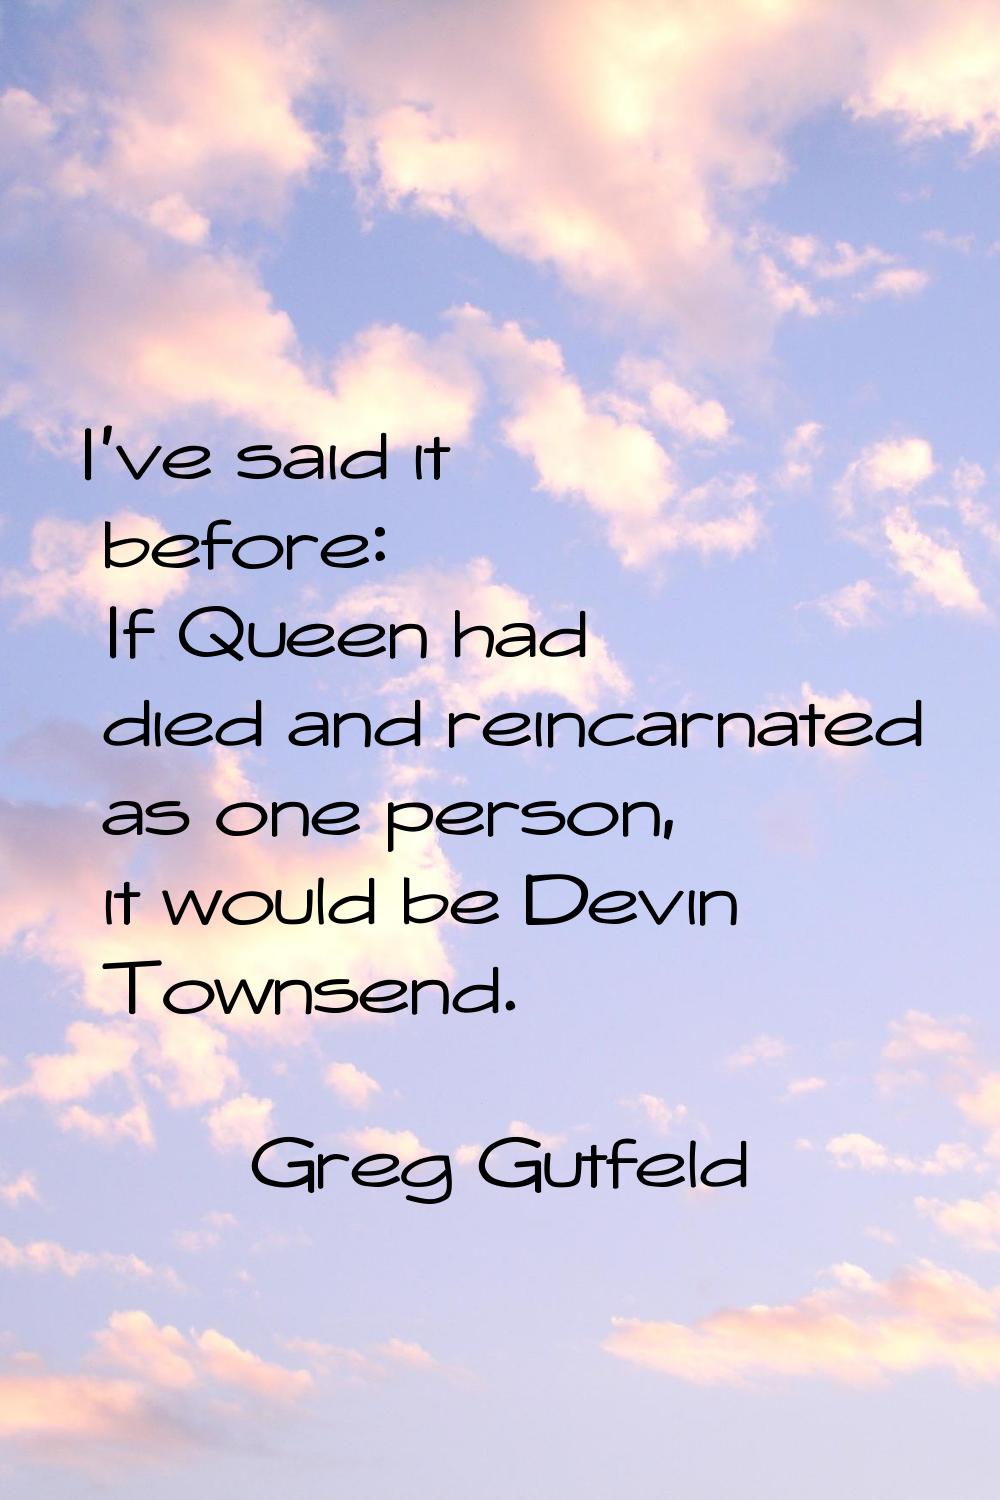 I've said it before: If Queen had died and reincarnated as one person, it would be Devin Townsend.